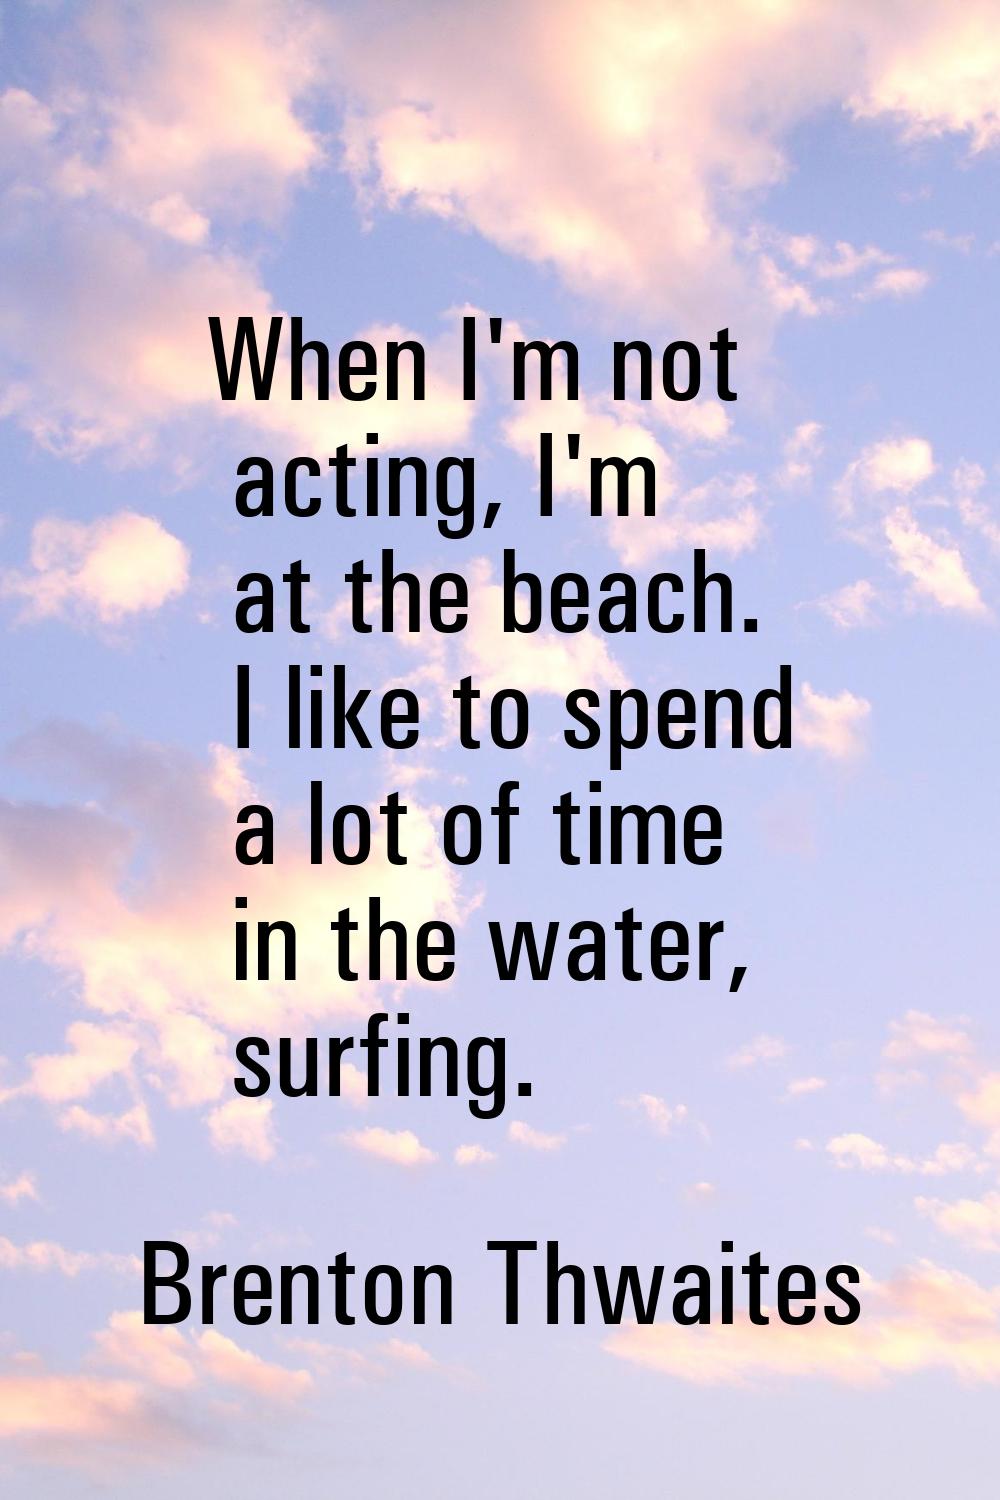 When I'm not acting, I'm at the beach. I like to spend a lot of time in the water, surfing.